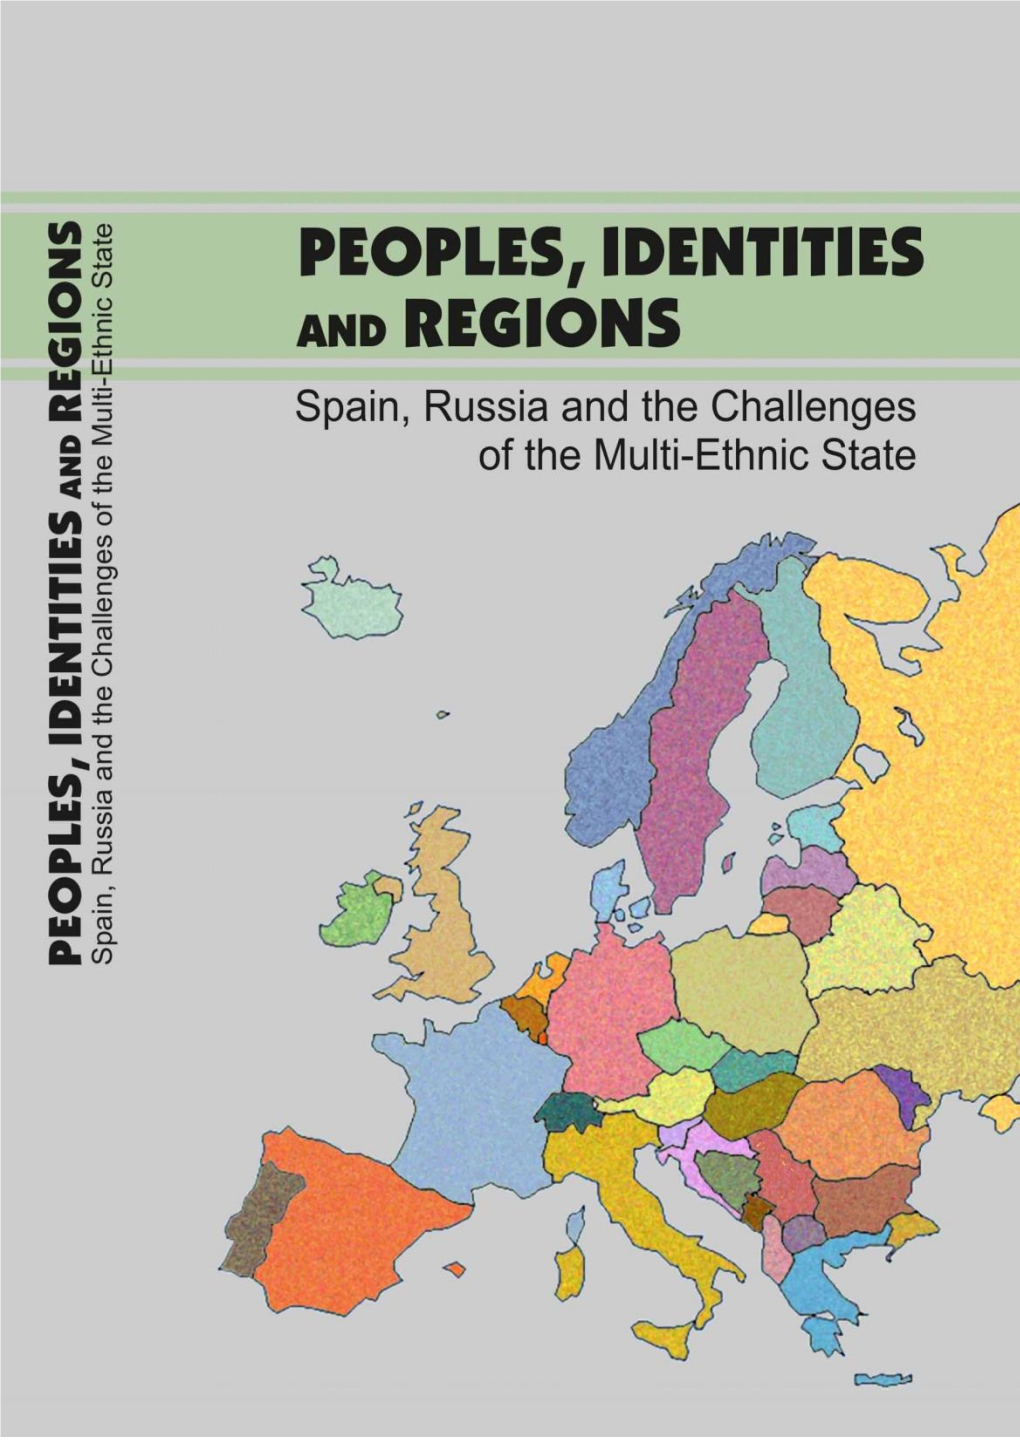 Peoples, Identities and Regions. Spain, Russia and the Challenges of the Multi-Ethnic State